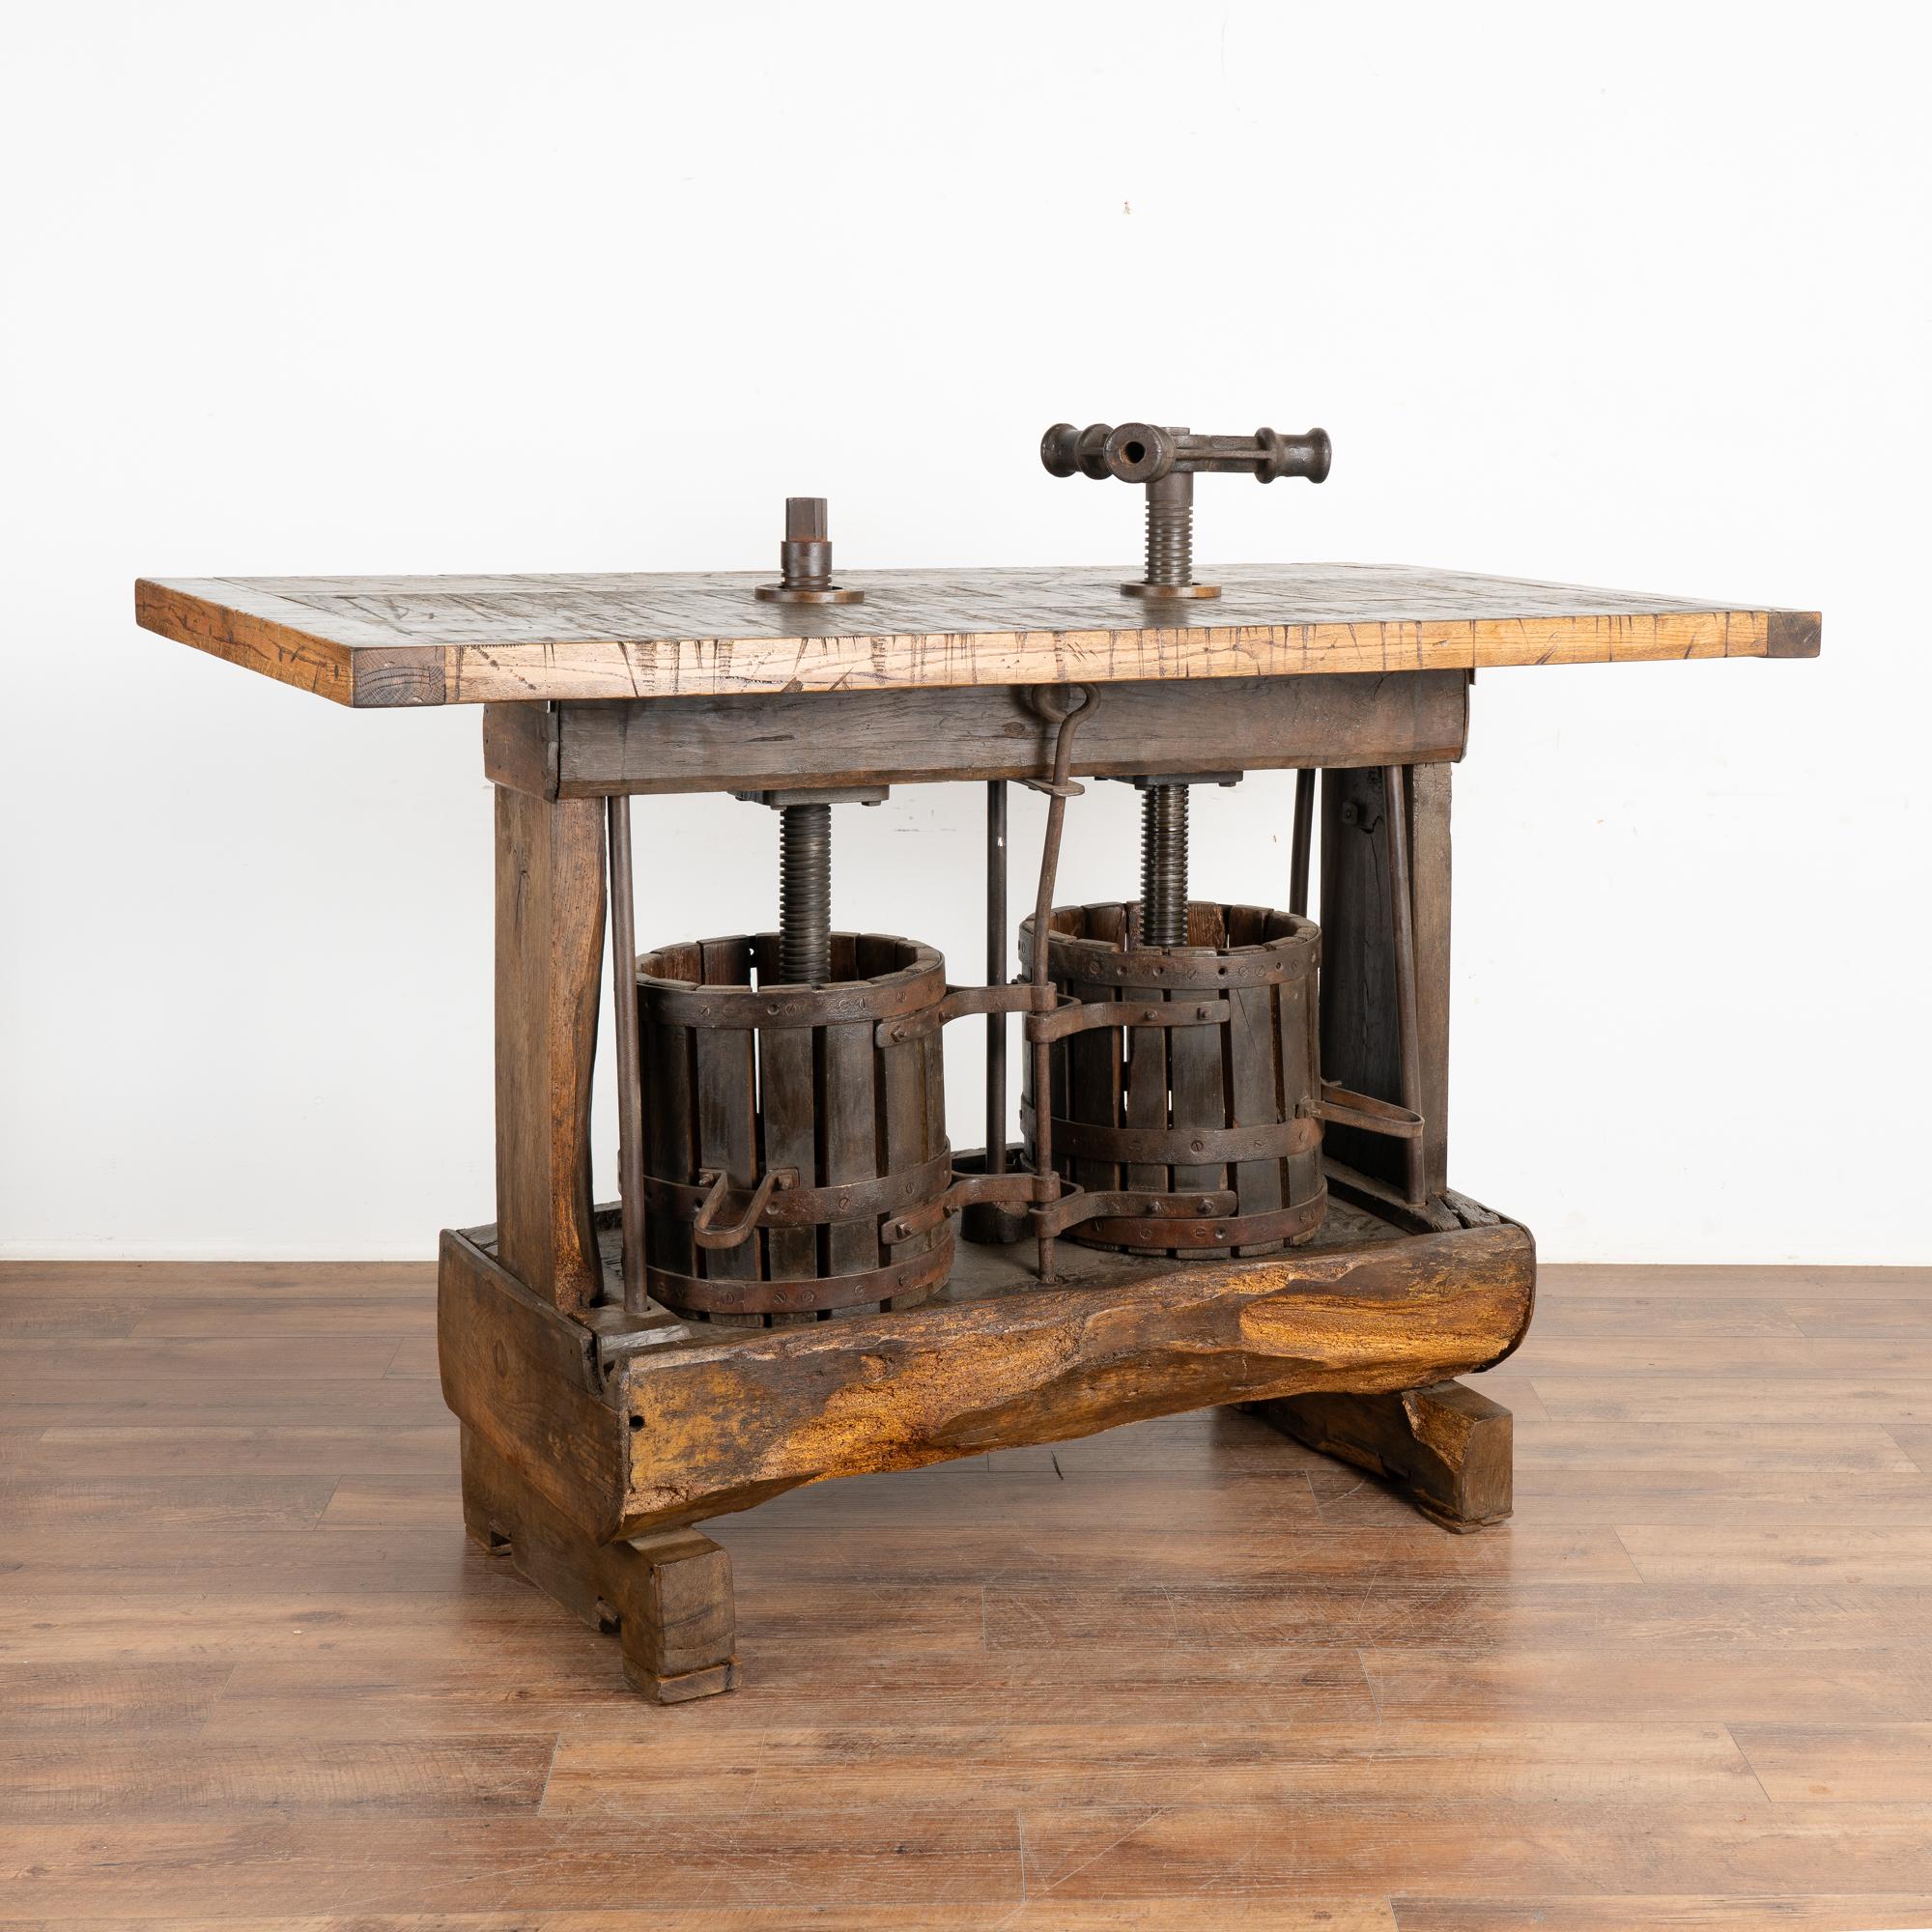 This exceptional wine tasting table or standing bar table was creating using an antique double wine press from Hungary serving as the unique and impressive base.
The top is made from old boxcar/railroad cart flooring with extensive distressing which